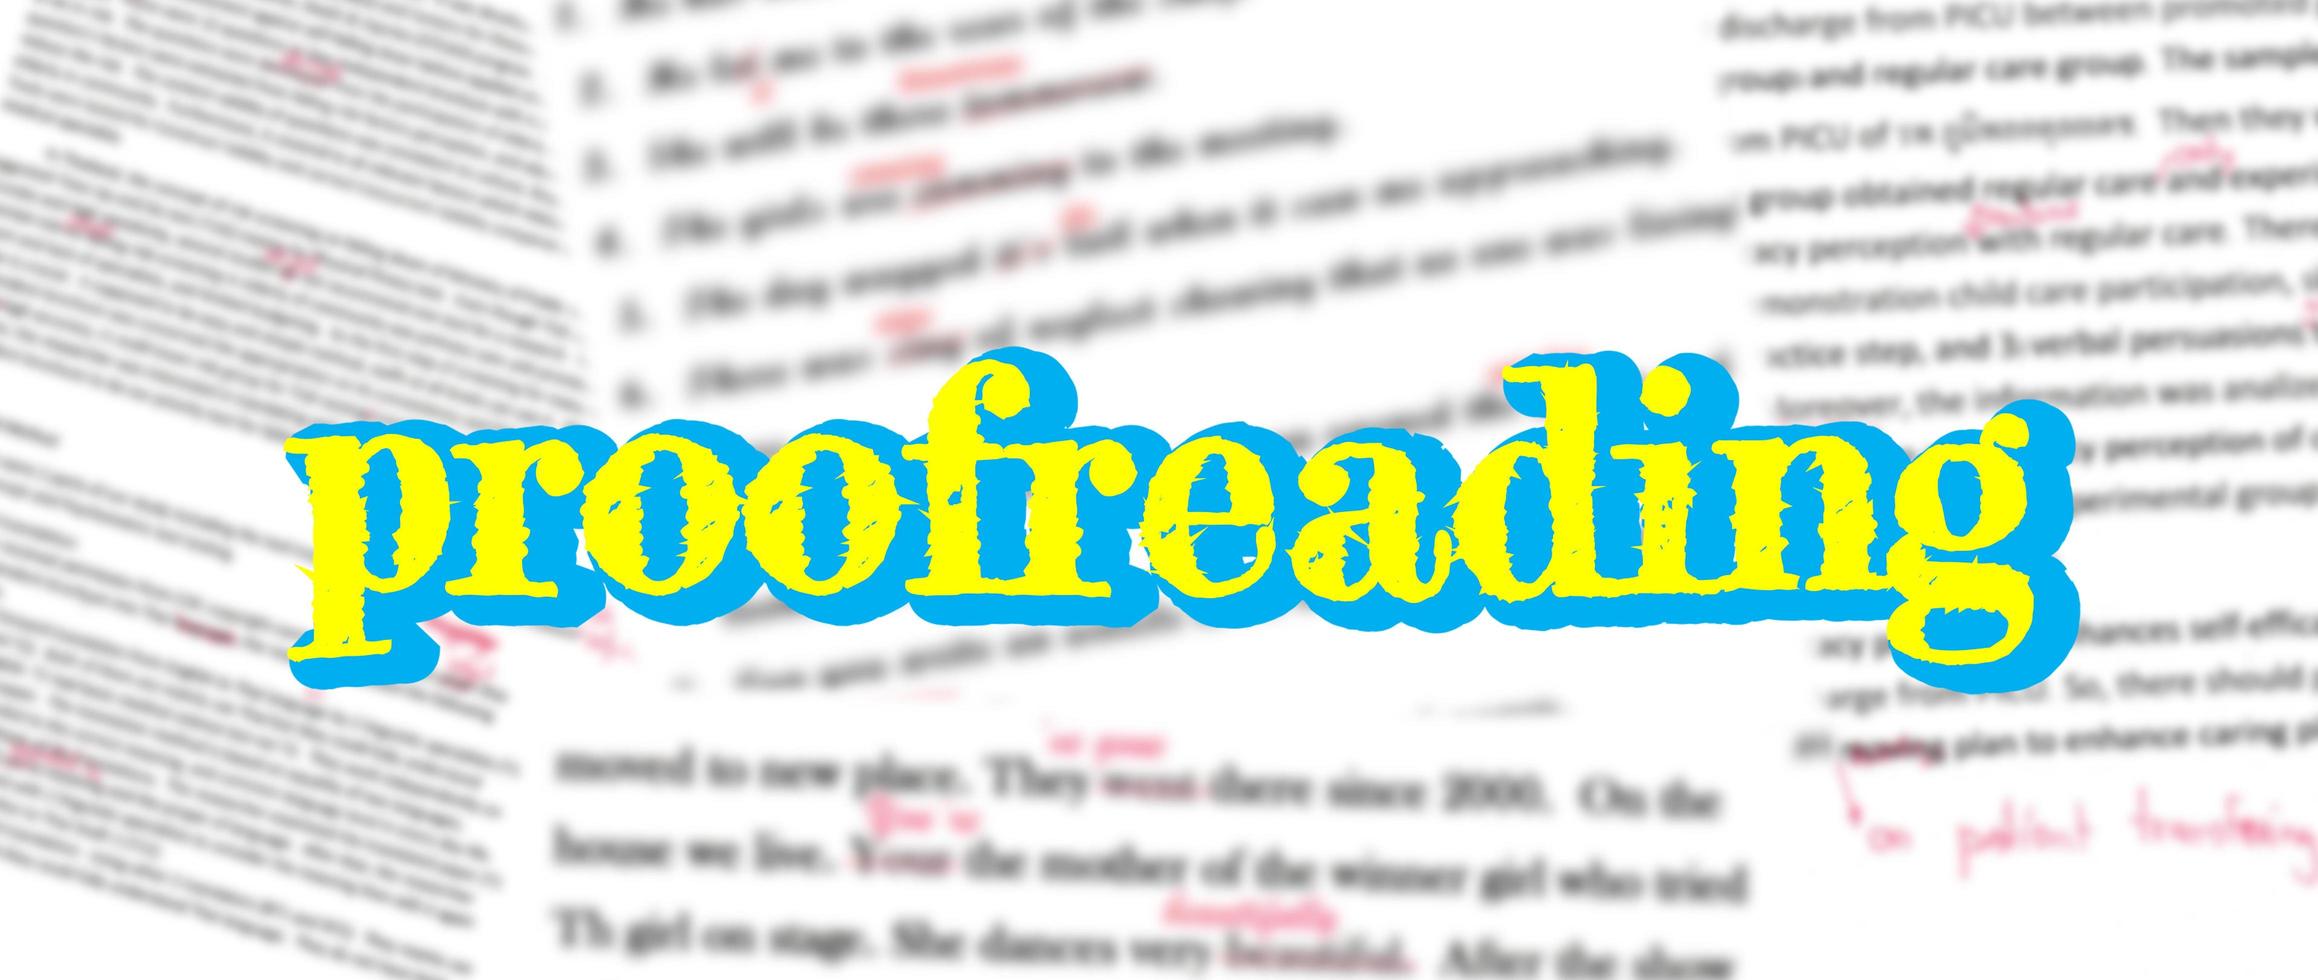 colorful proofreading single word over blurred edited text photo